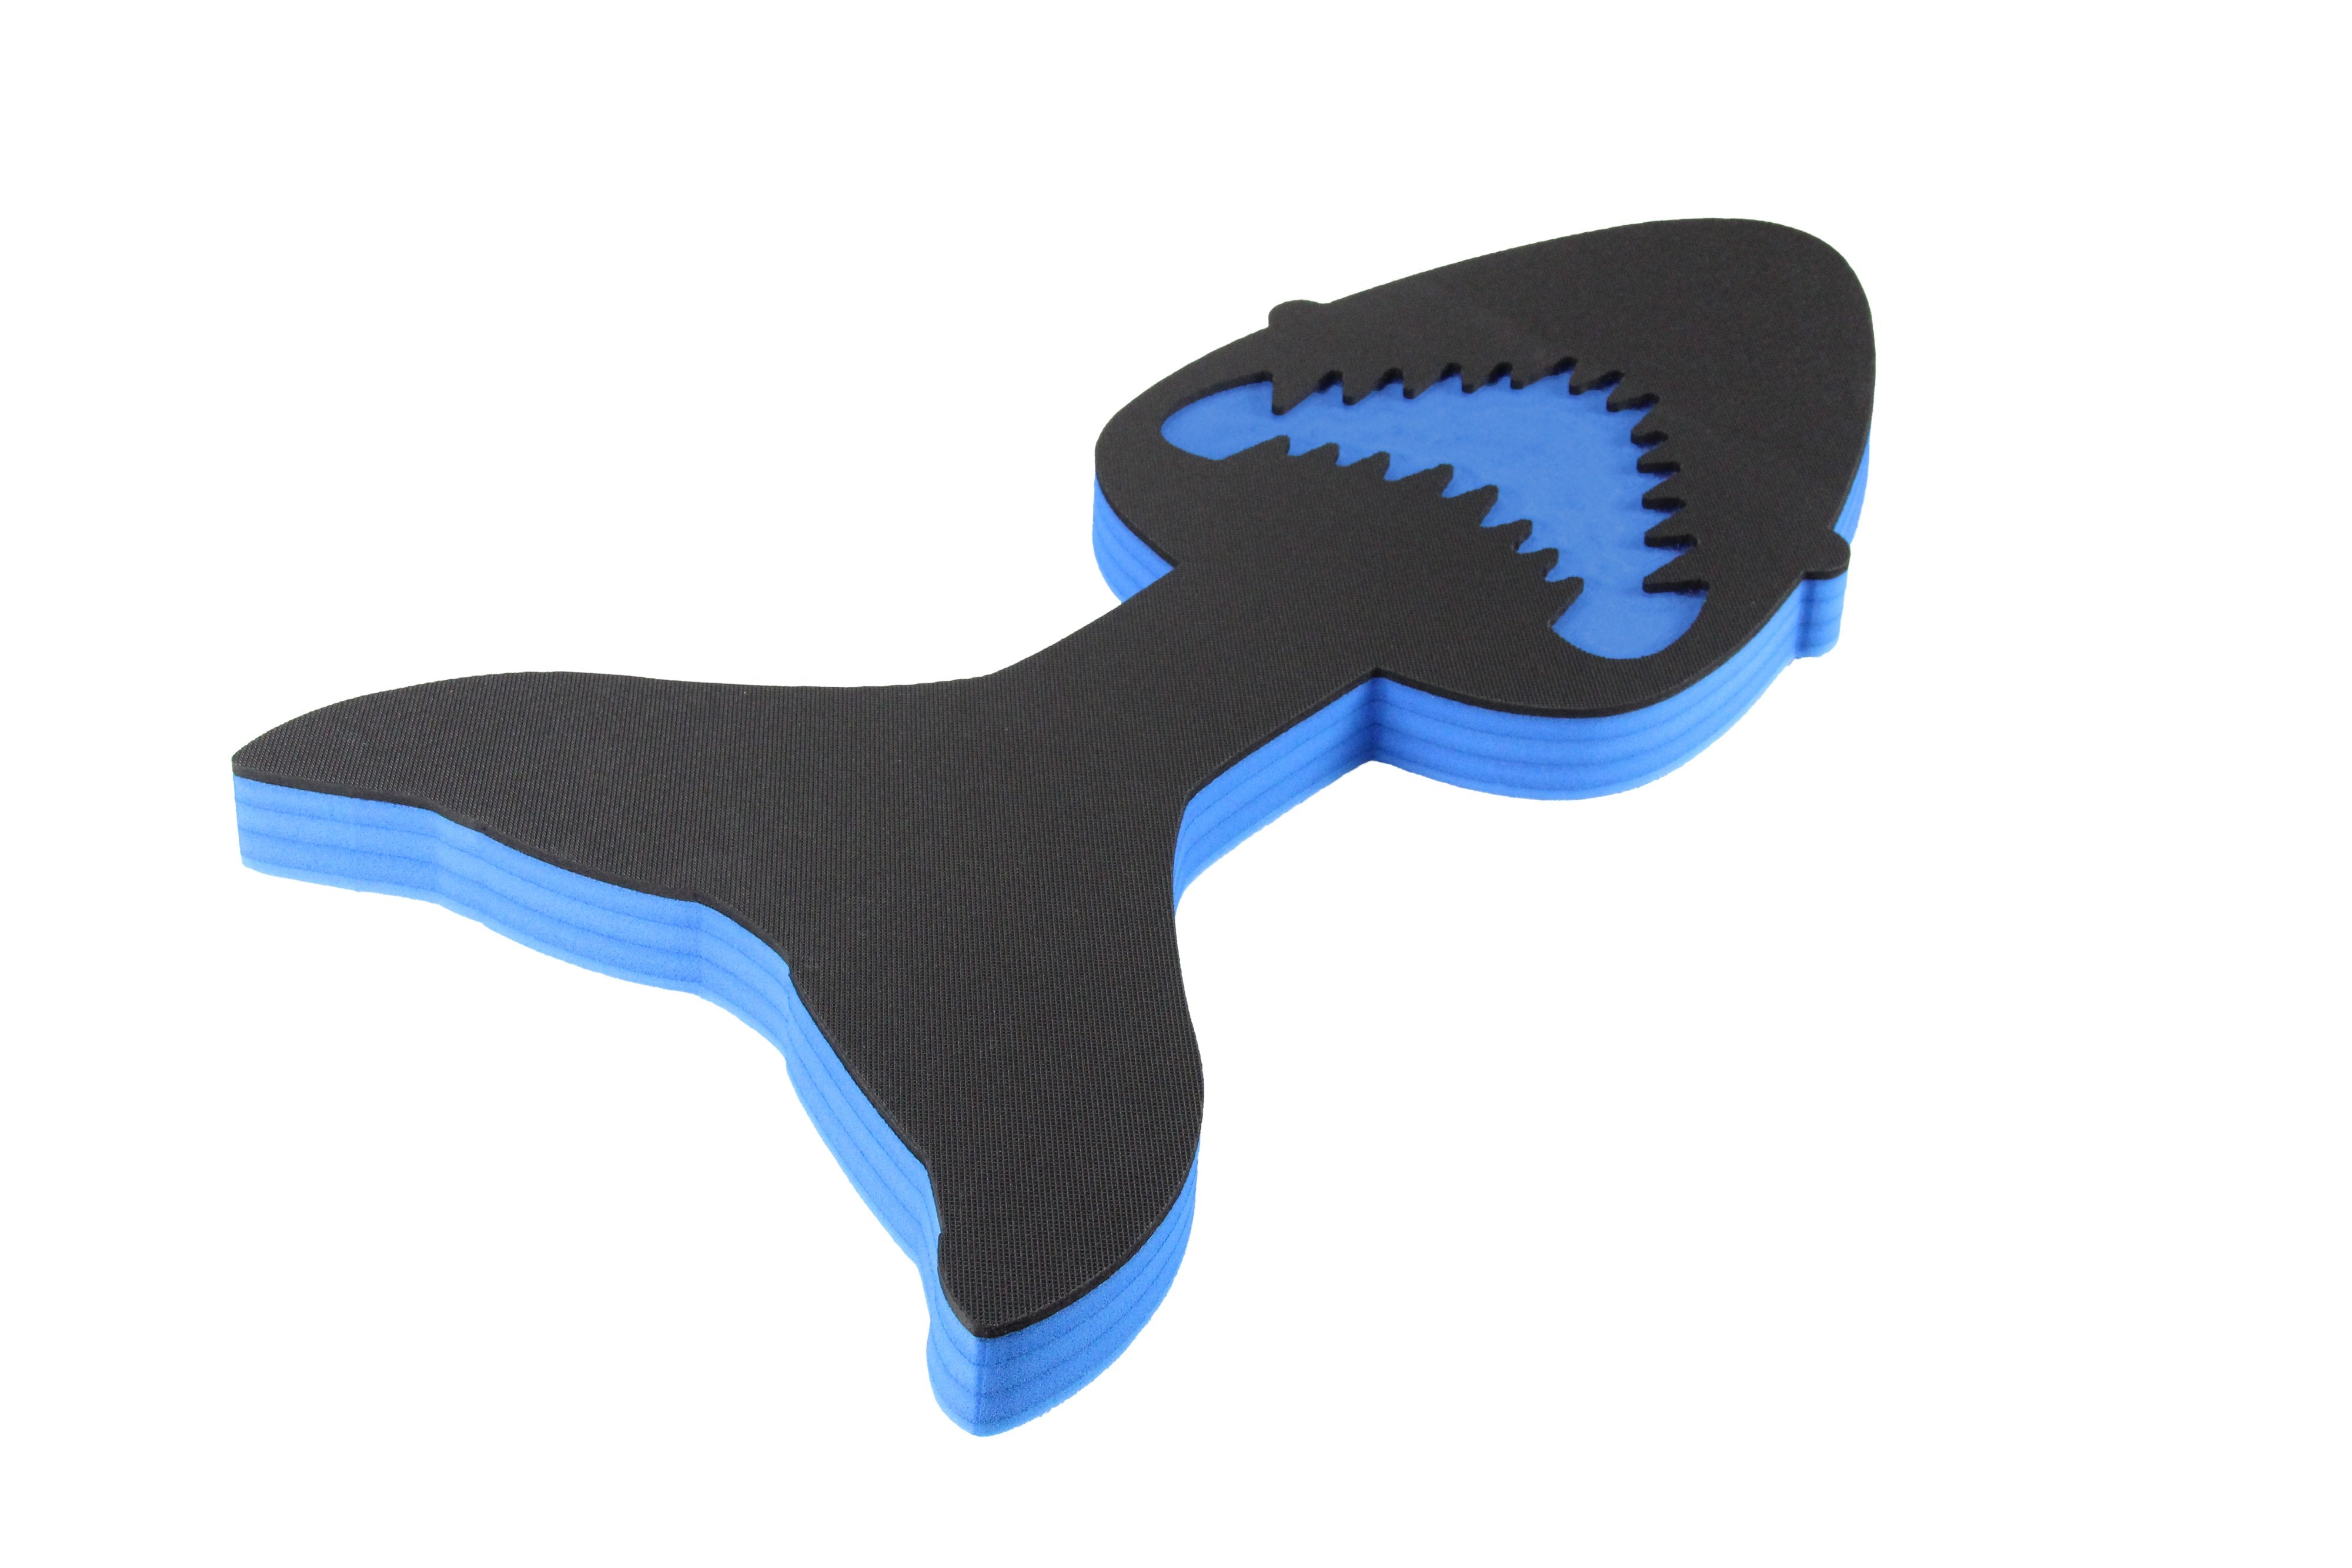 Floating Shark Saddle Seat for Pool Lake or Beach Party Comfortable Water Float Lounge Chair Buoyant Durable Heavy Duty Foam 34.5 Inches Long